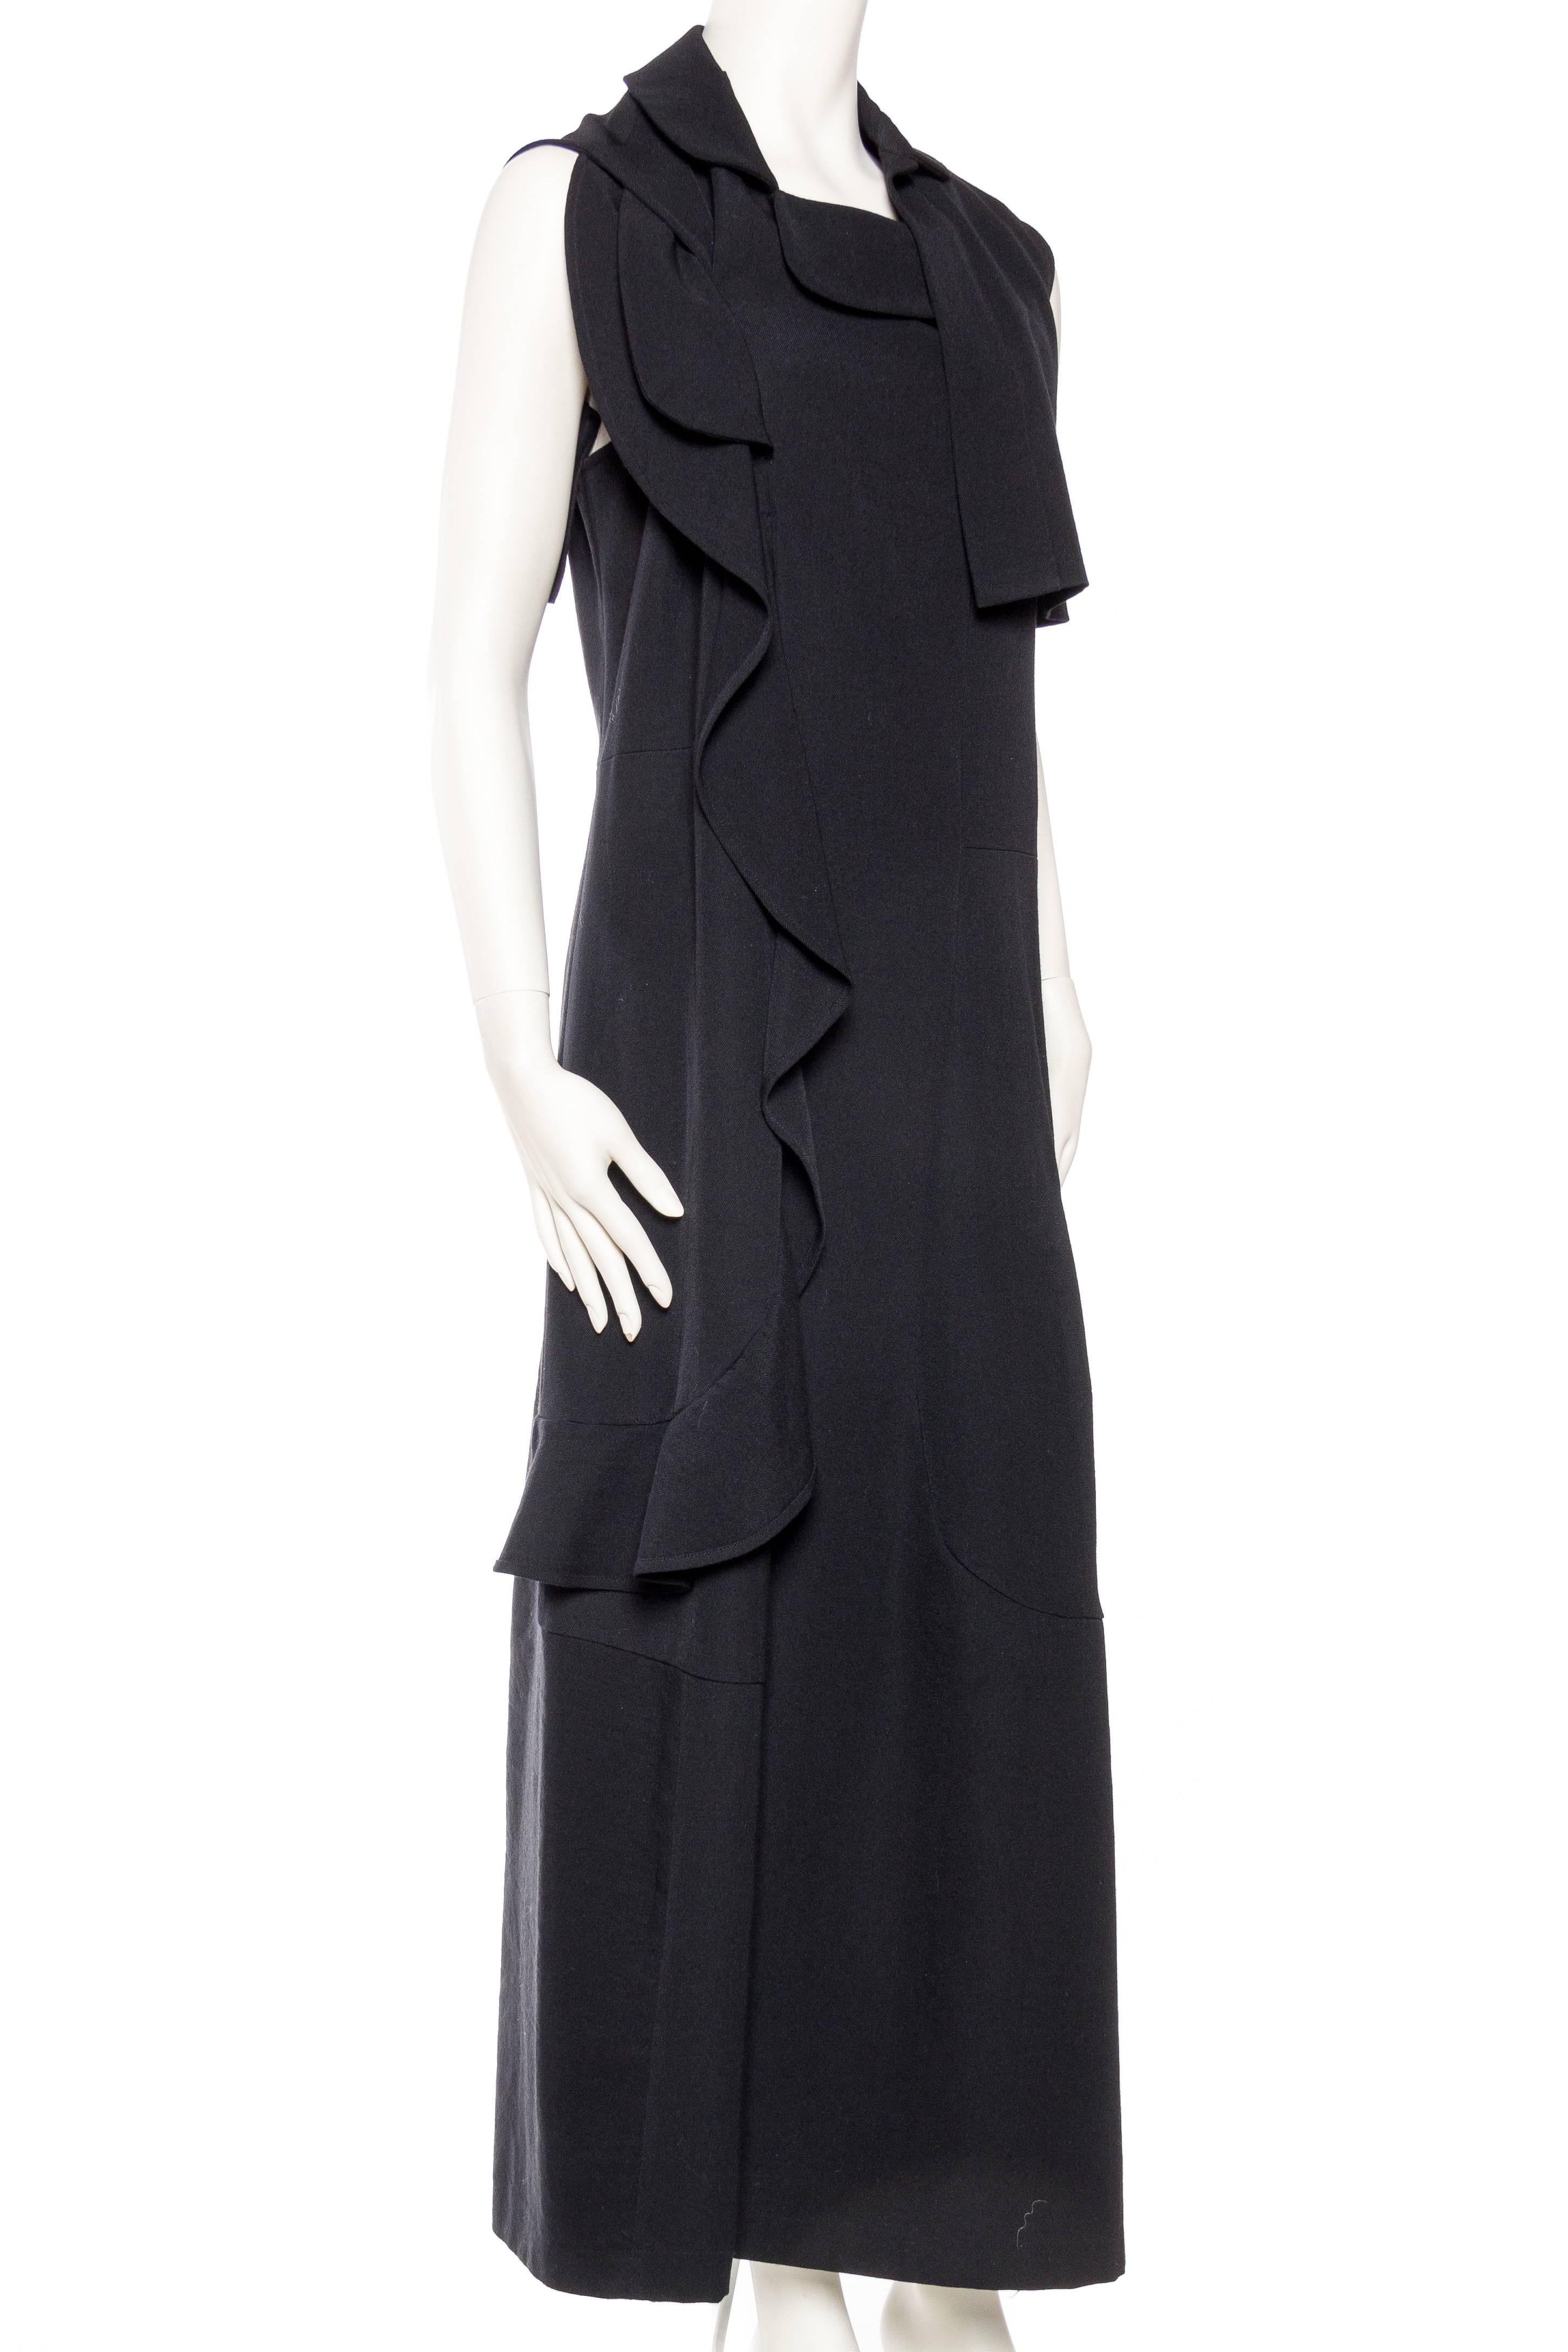 Women's 1990S COMME DES GARCONS Black Wool Deconstructed Ruffled Dress For Sale